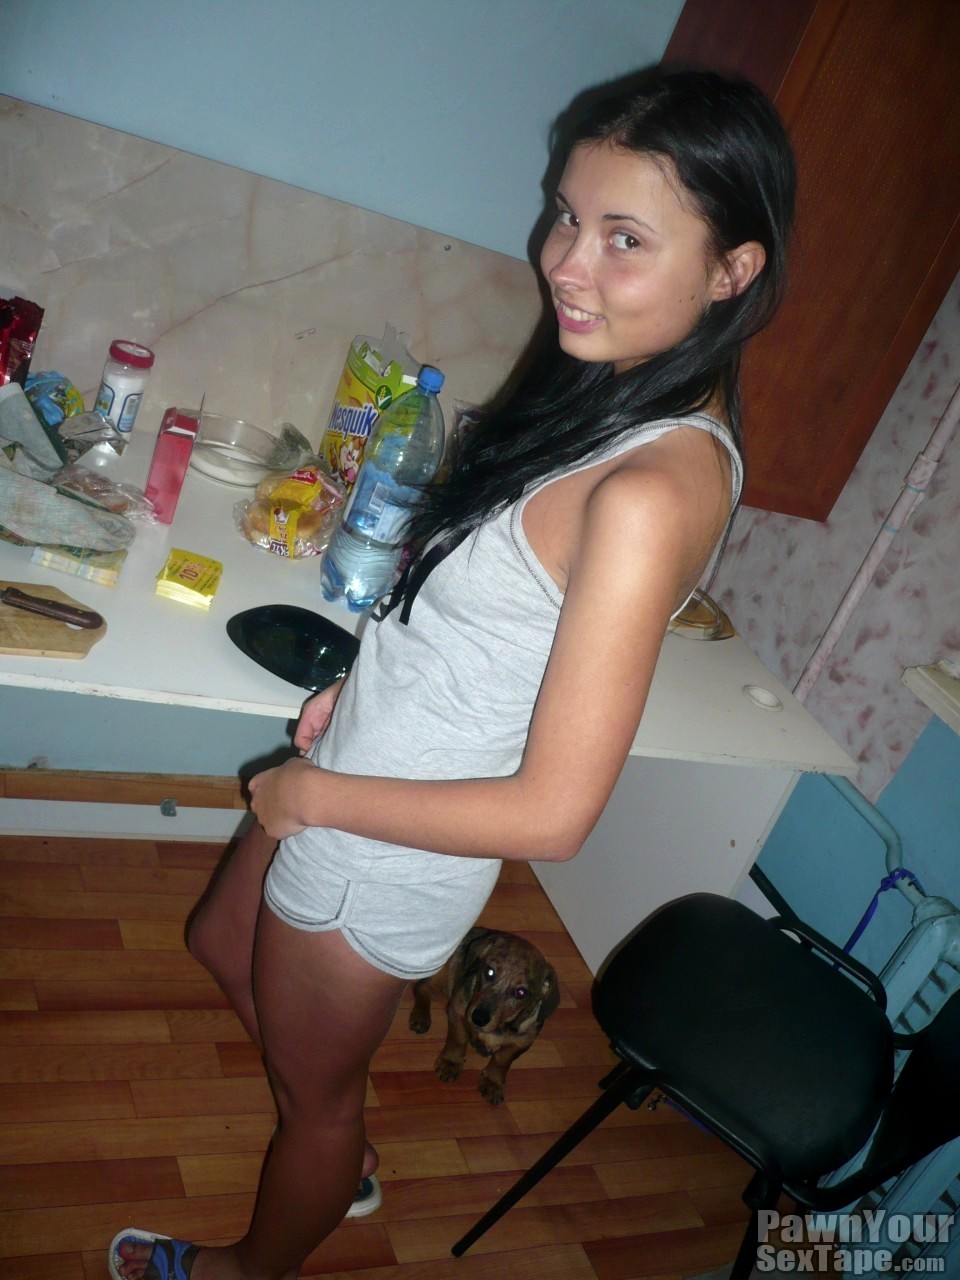 Babe Today Pawn Your Sex Tape Pawnyoursextape Model Cyber Amateur Videos Wiki Mobile Porn Pics image